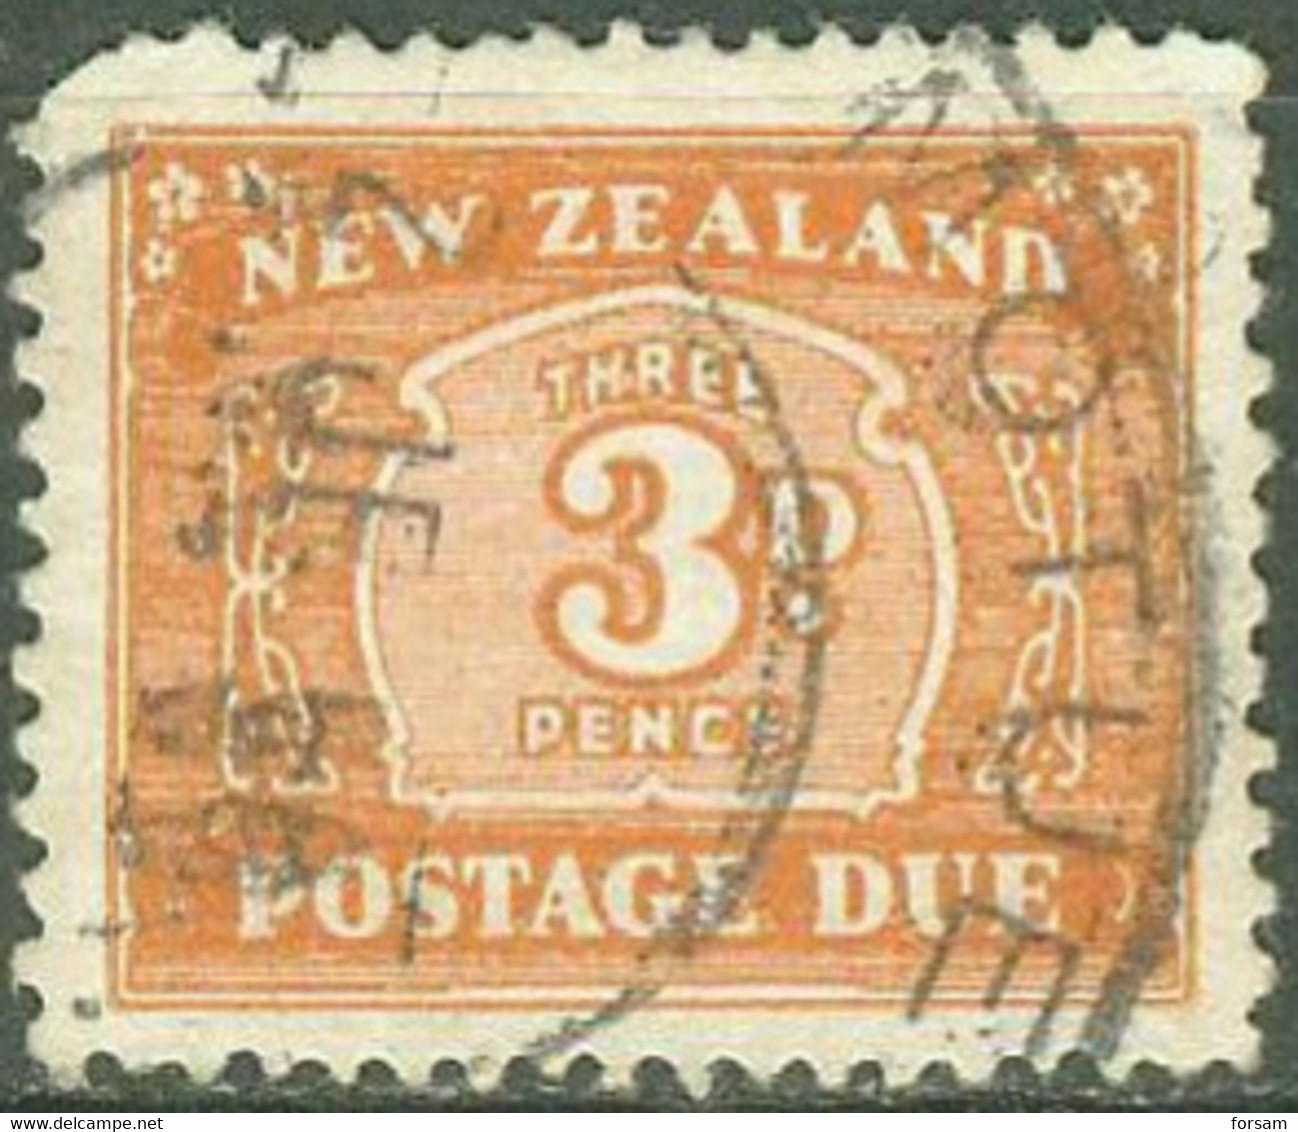 NEW ZEALAND..1945..Michel # 31...used...Postage Due...MiCV - 6.50 Euro. - Used Stamps